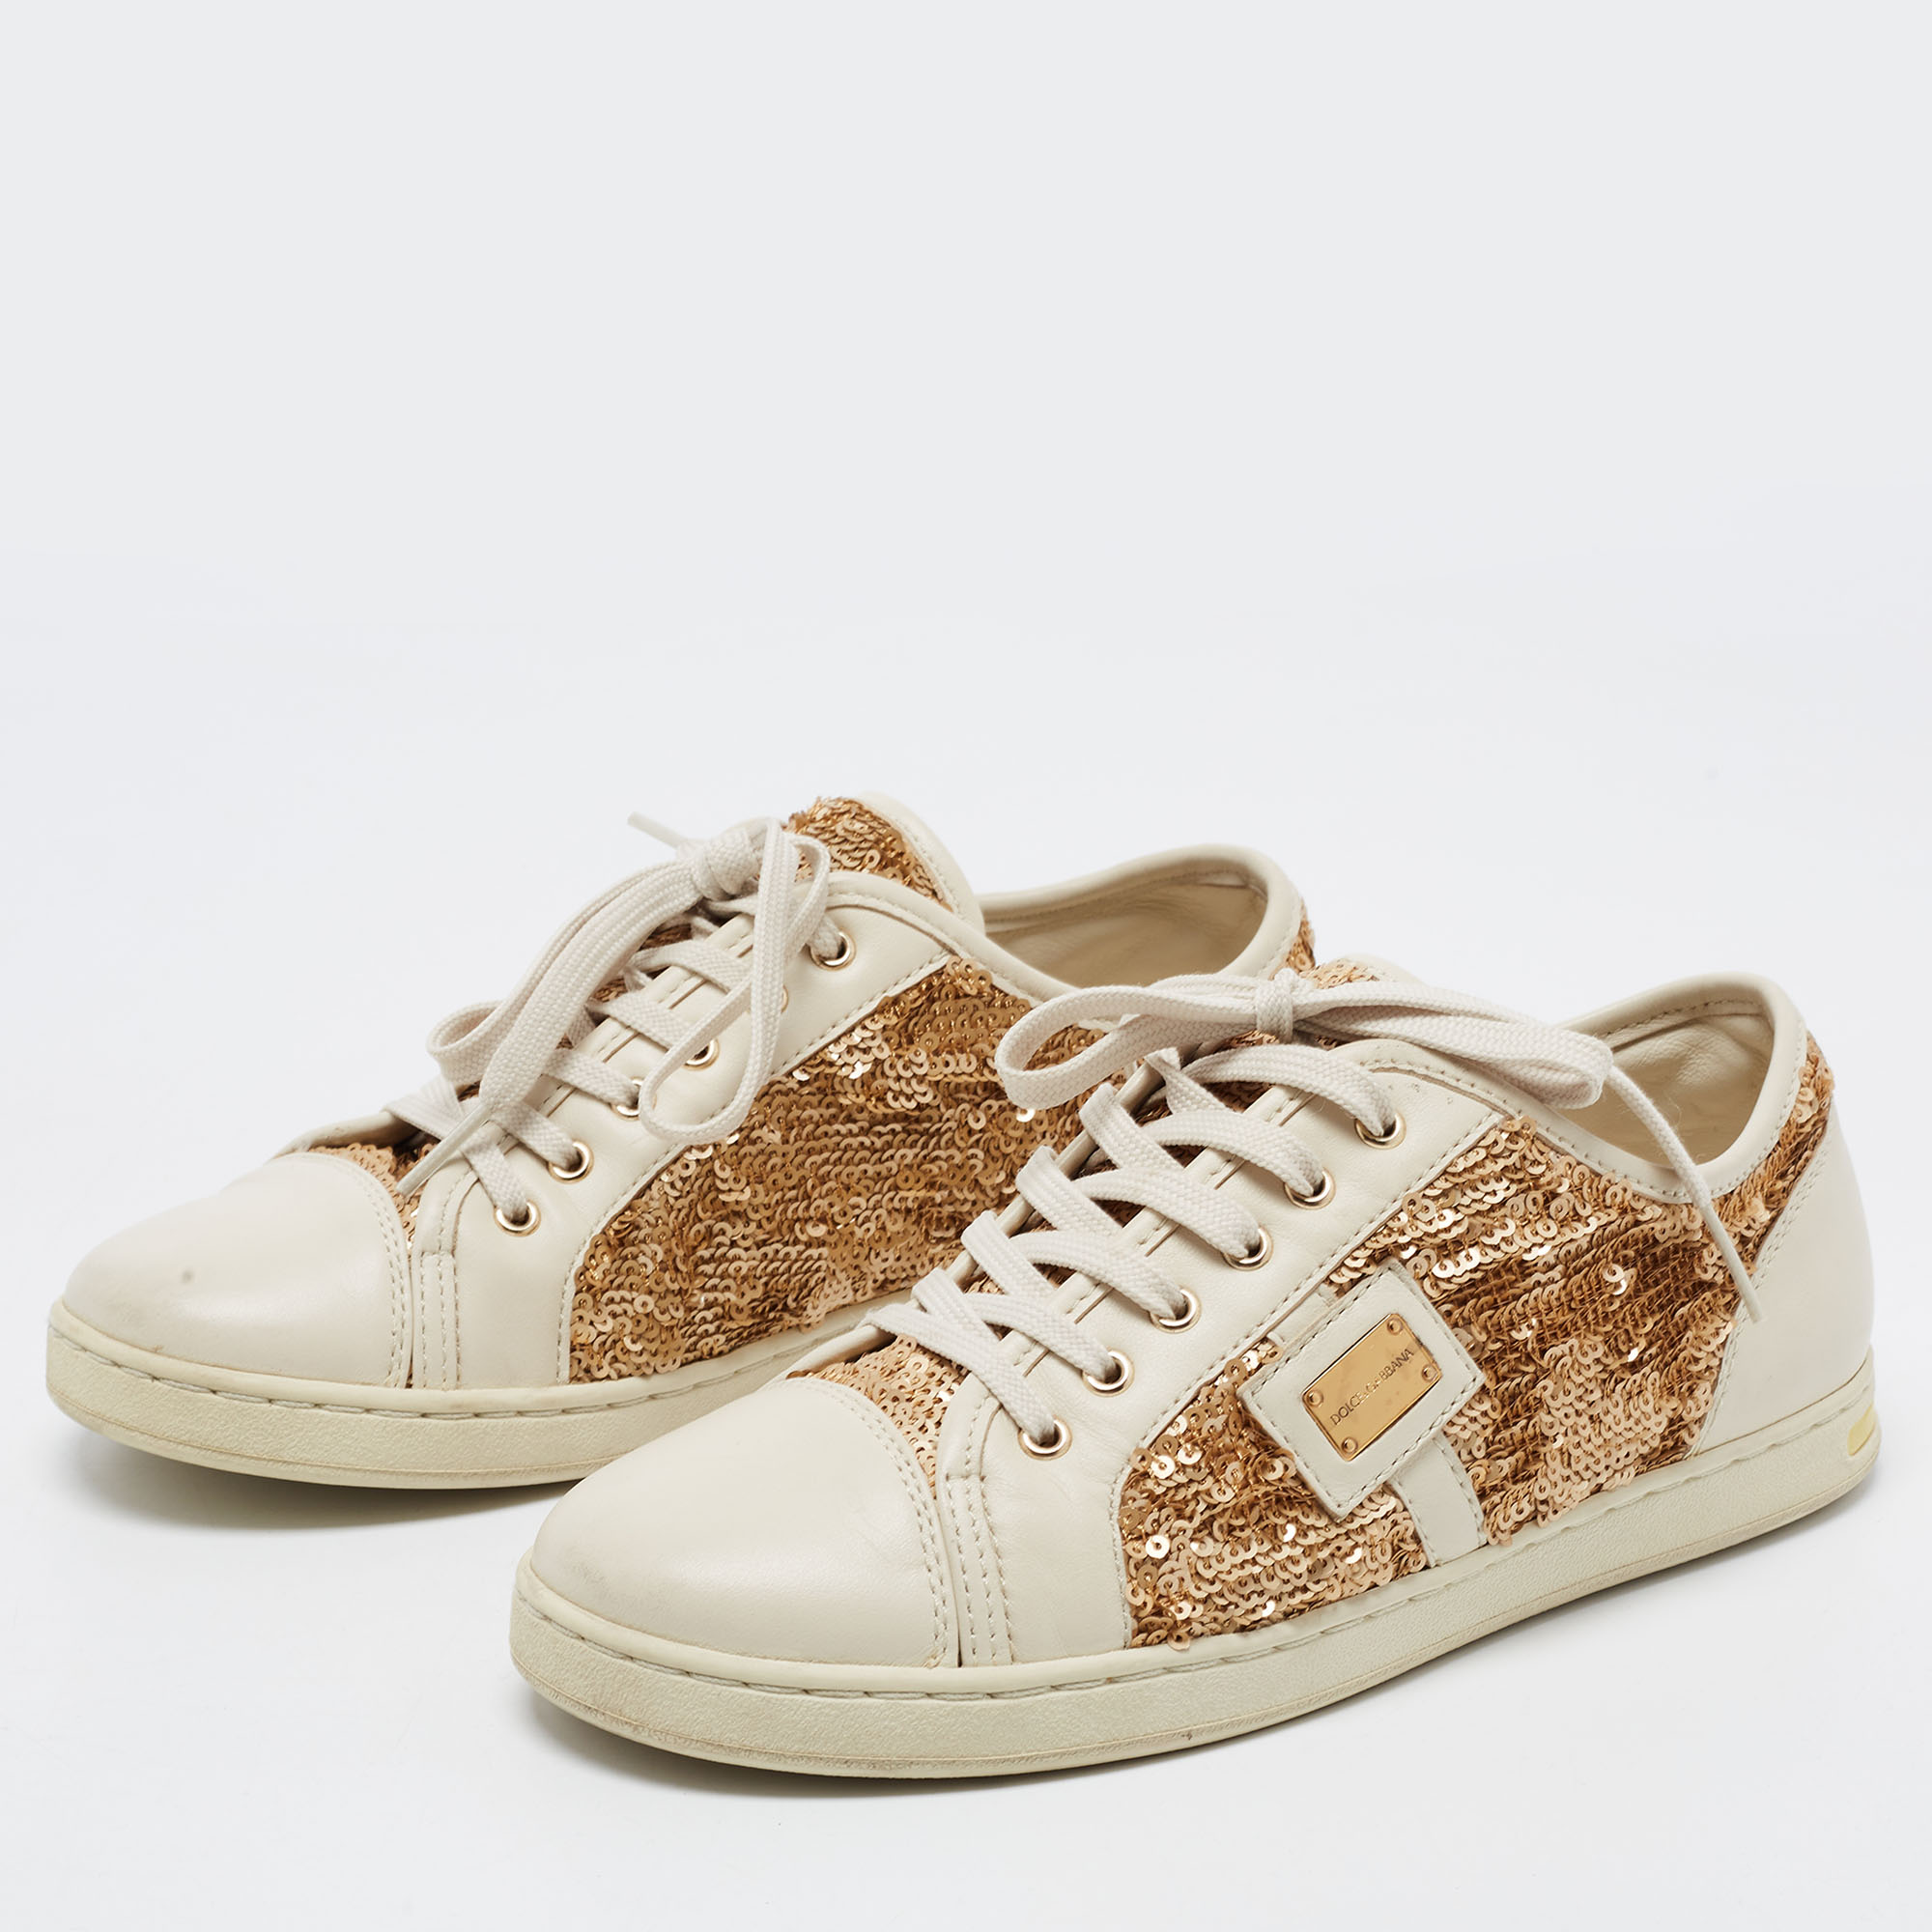 

Dolce & Gabbana Cream Leather and Sequin Embellished Low Top Sneakers Size